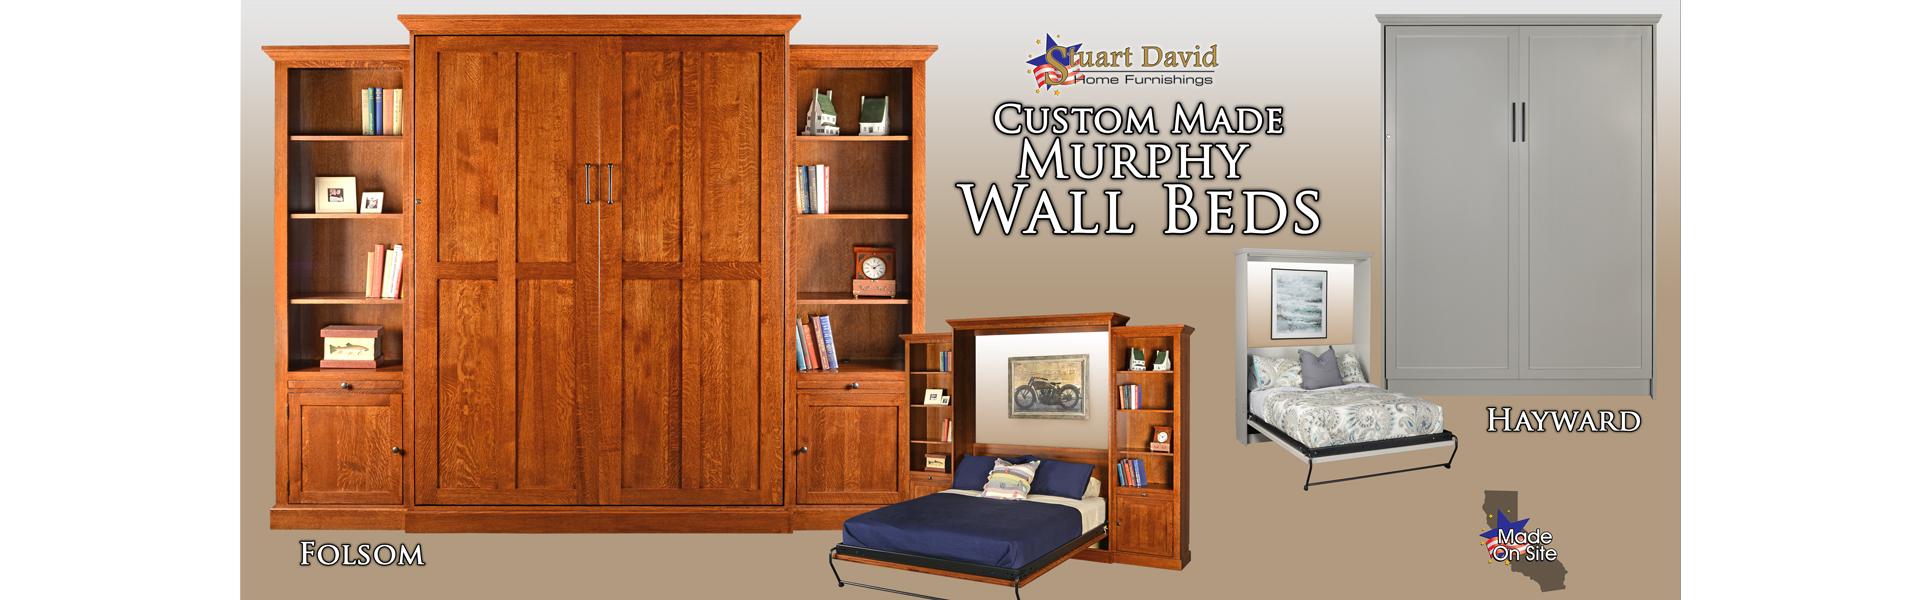 Wall Beds